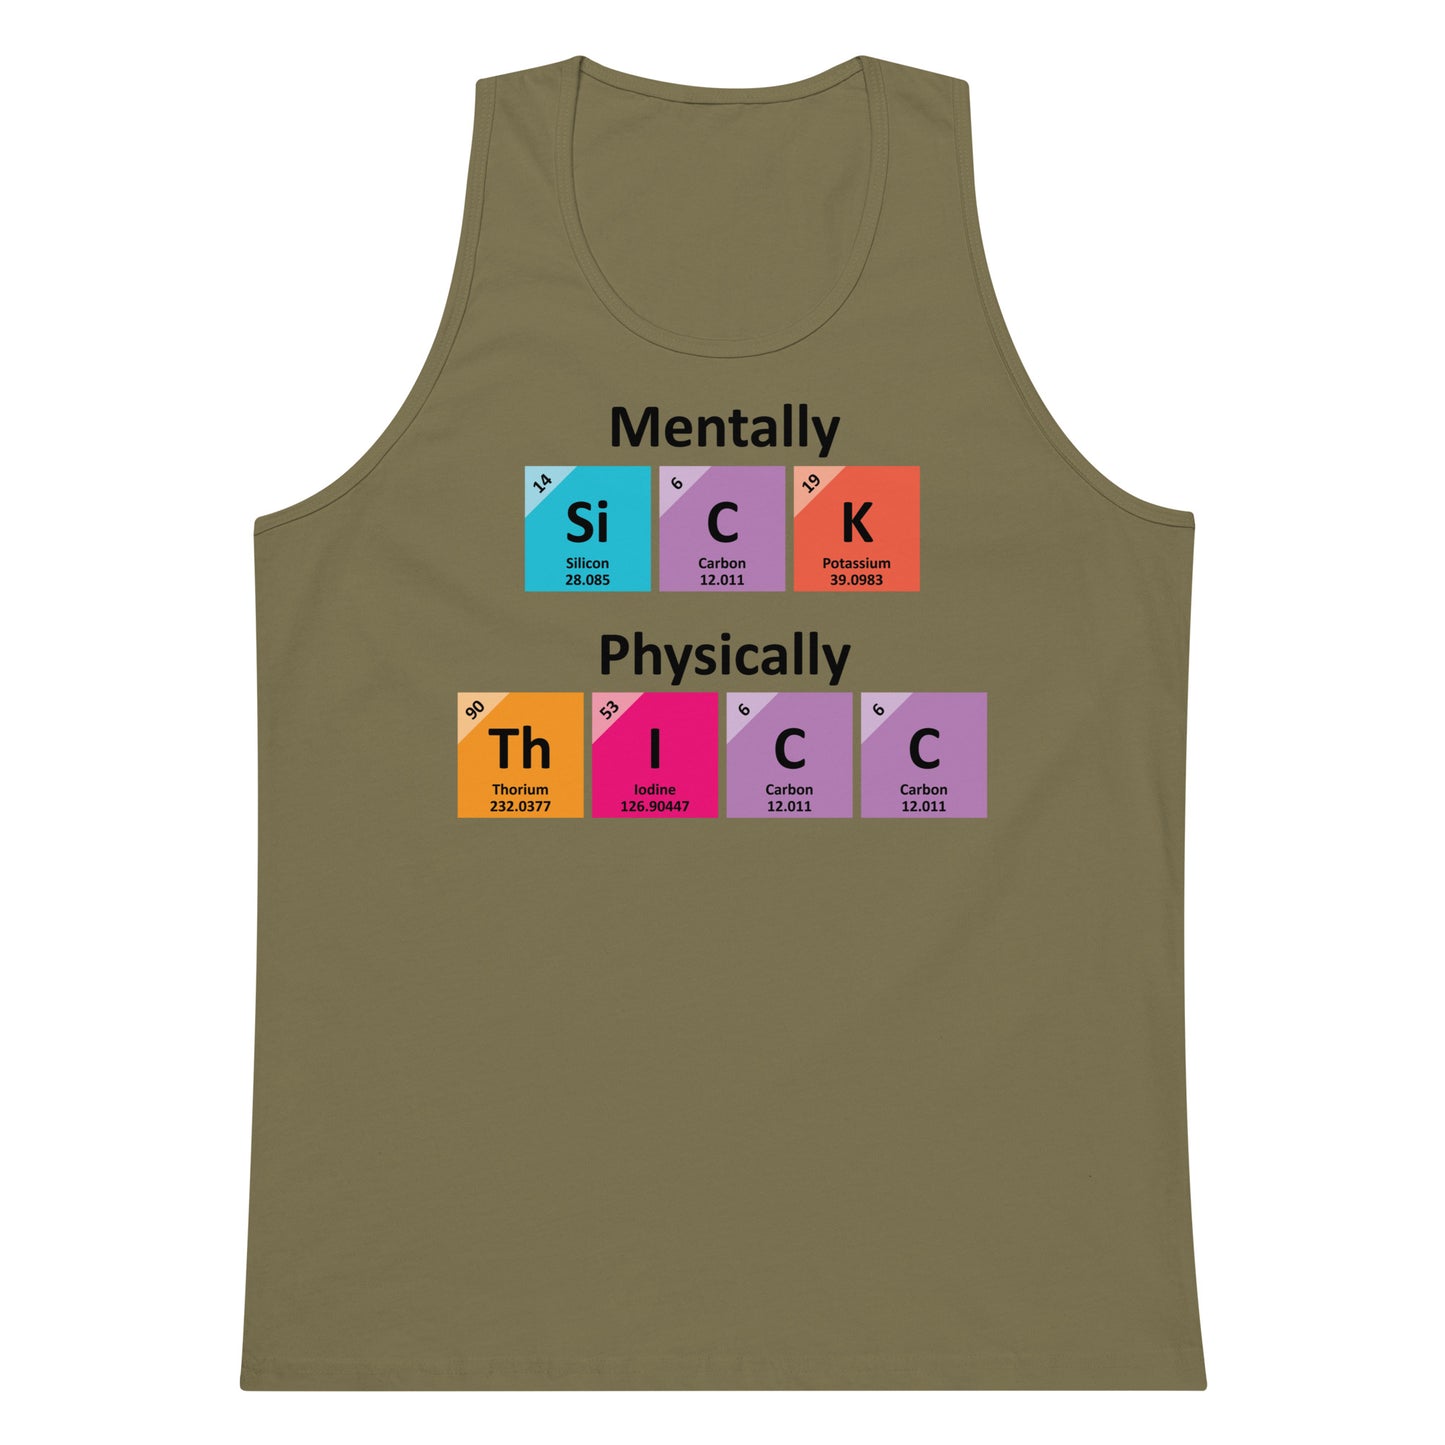 Mentally SiCK Physically ThICC tank top